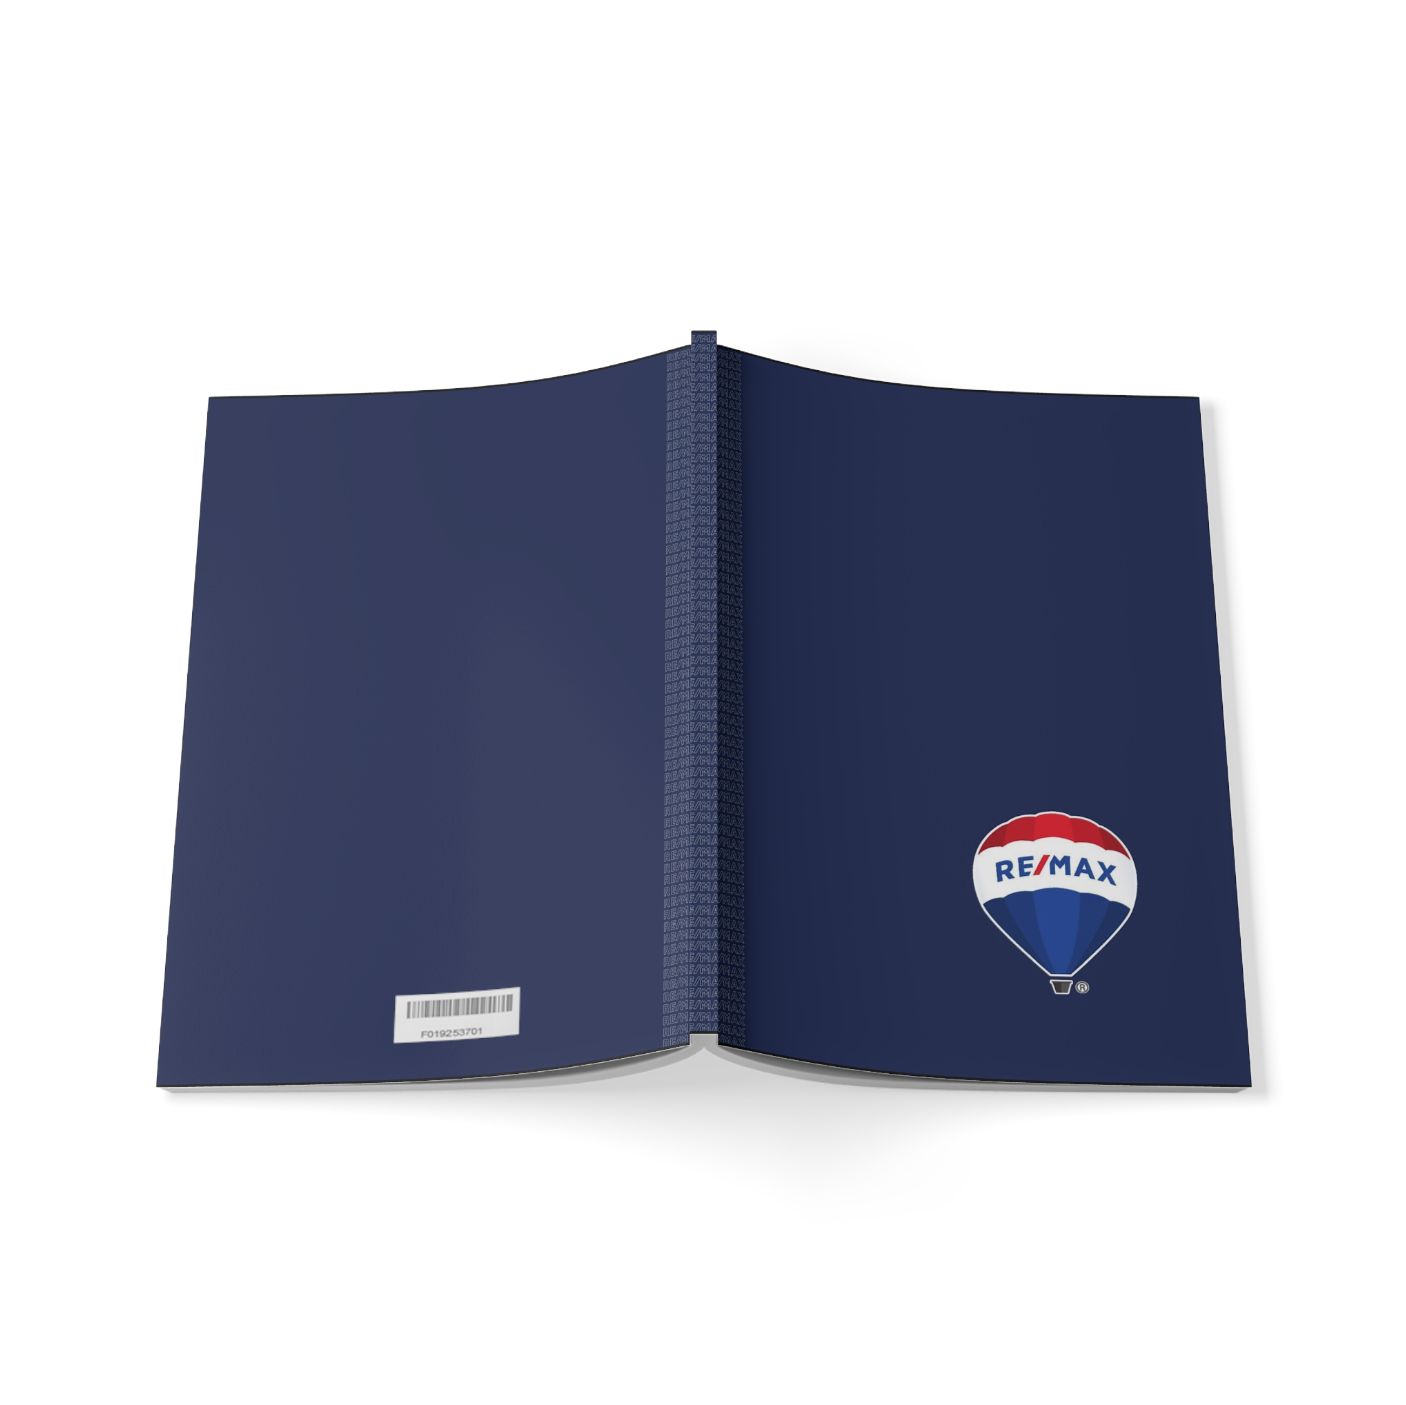 RE/MAX Full Color SoftCover Binders Blue Monogram (from as low as $6.18 per cover)